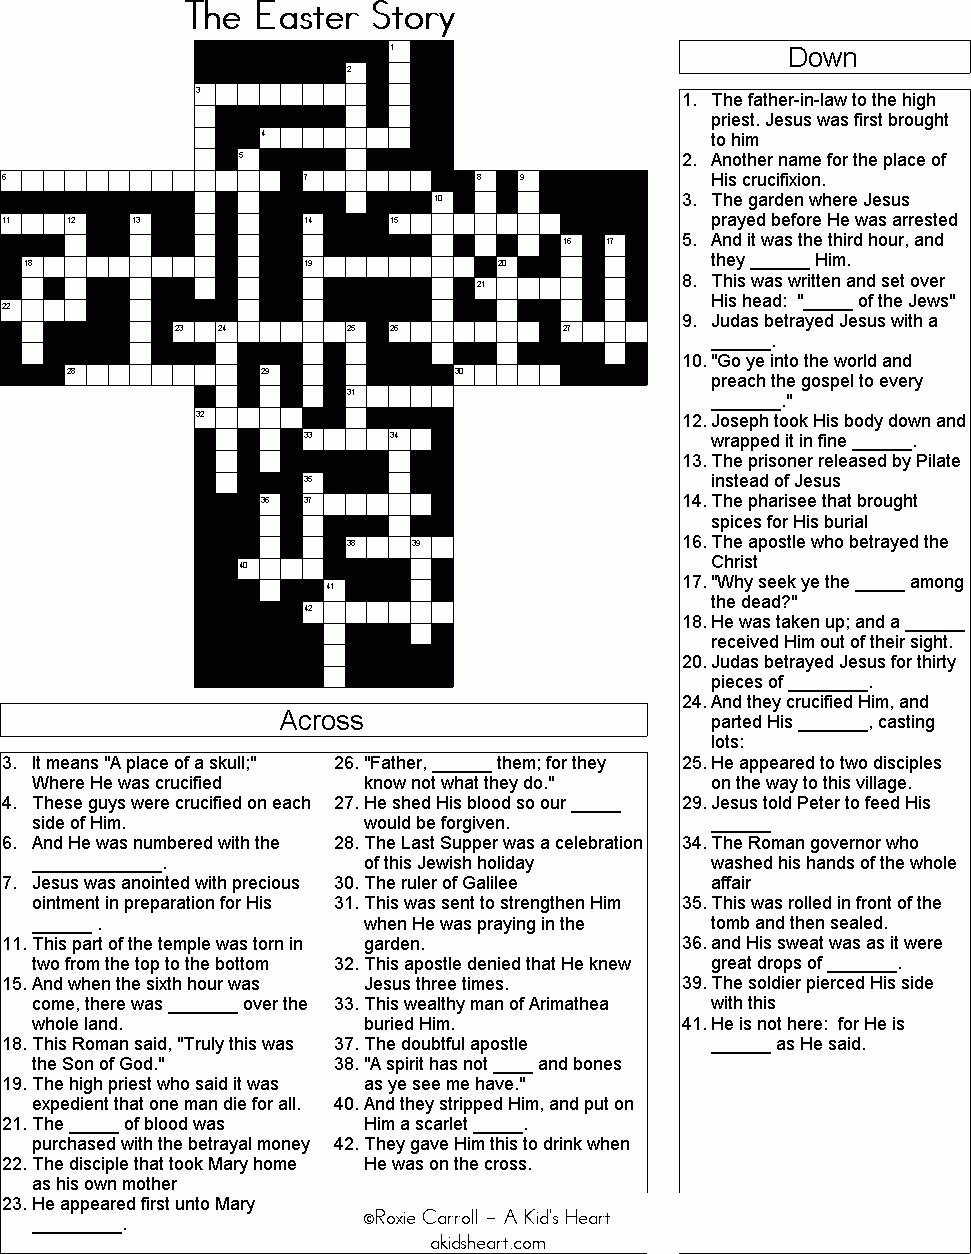 The Easter Story Crossword Puzzle | Bible Crosswords/word Search - Christian Crossword Puzzles Printable